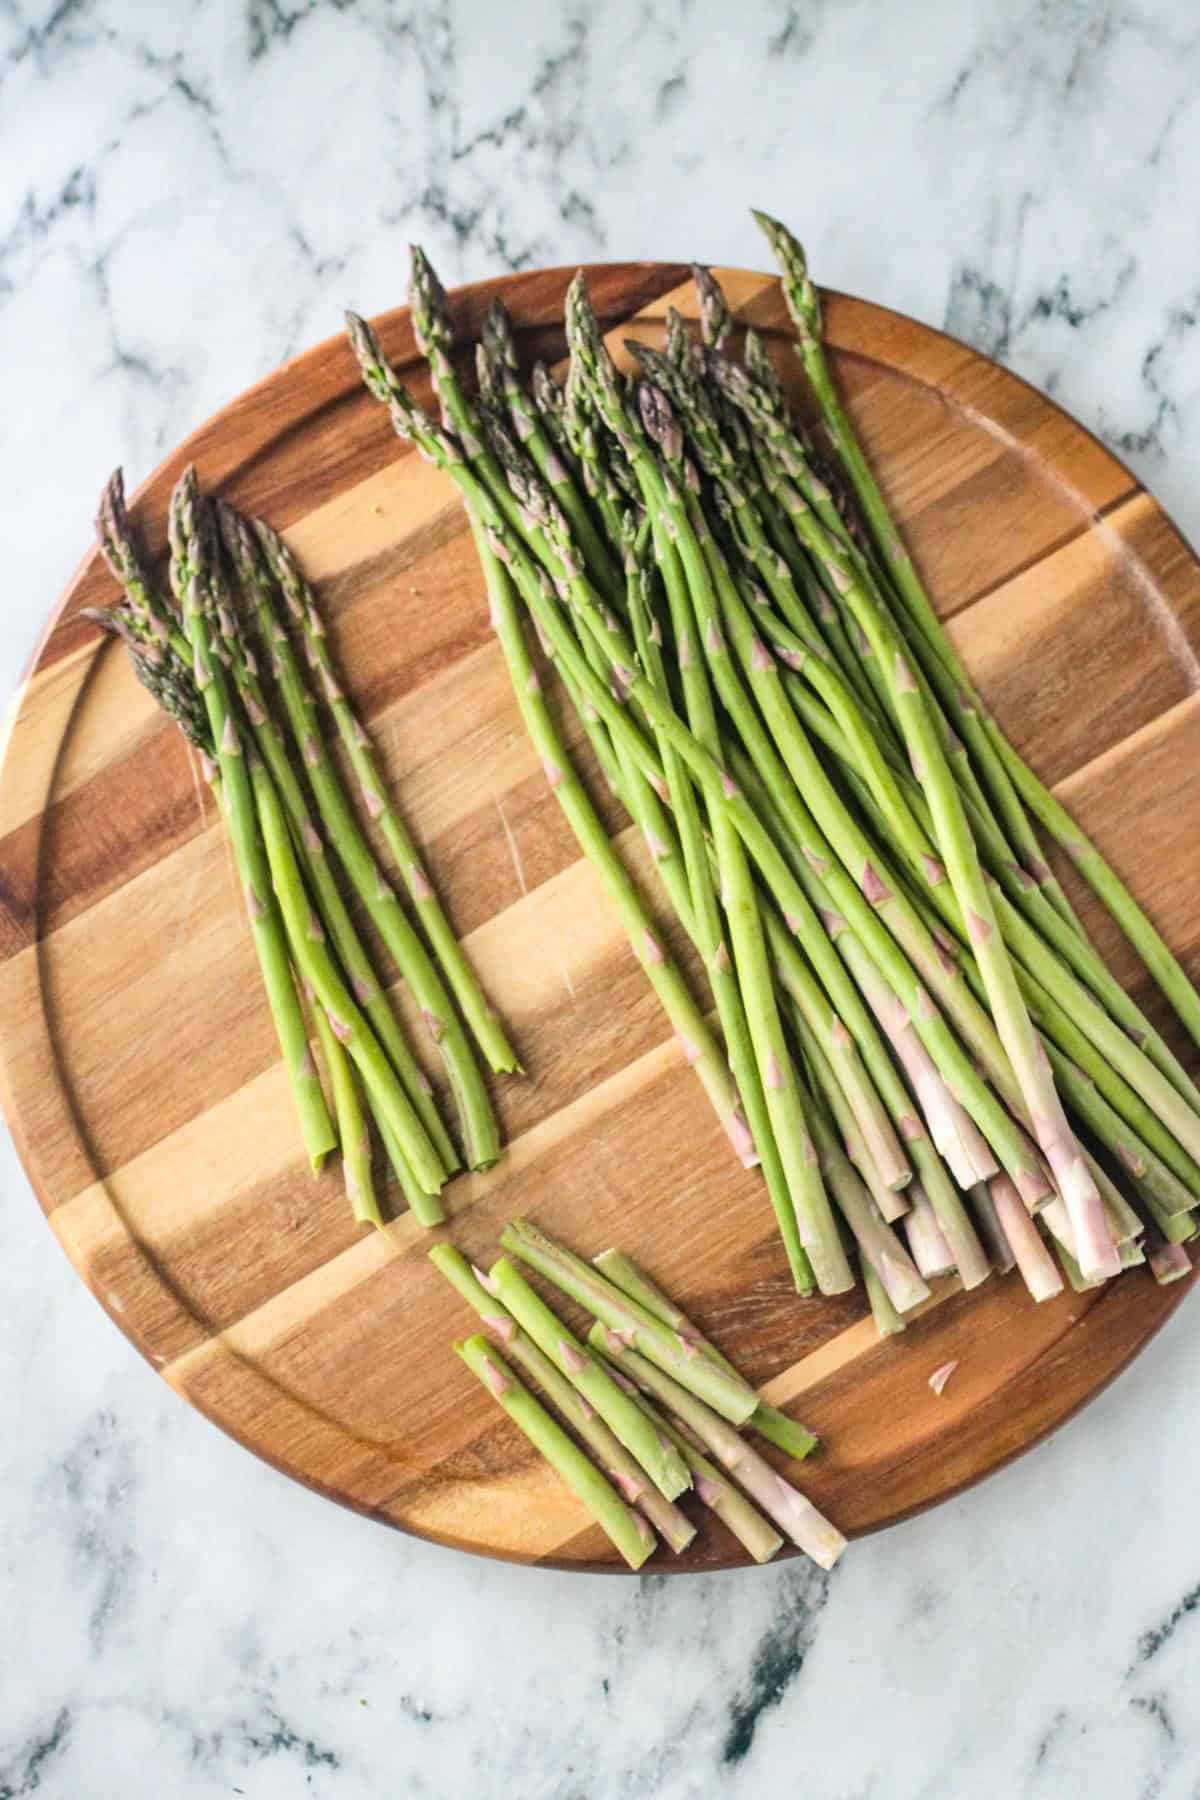 The woody ends of asparagus spears being snapped off.